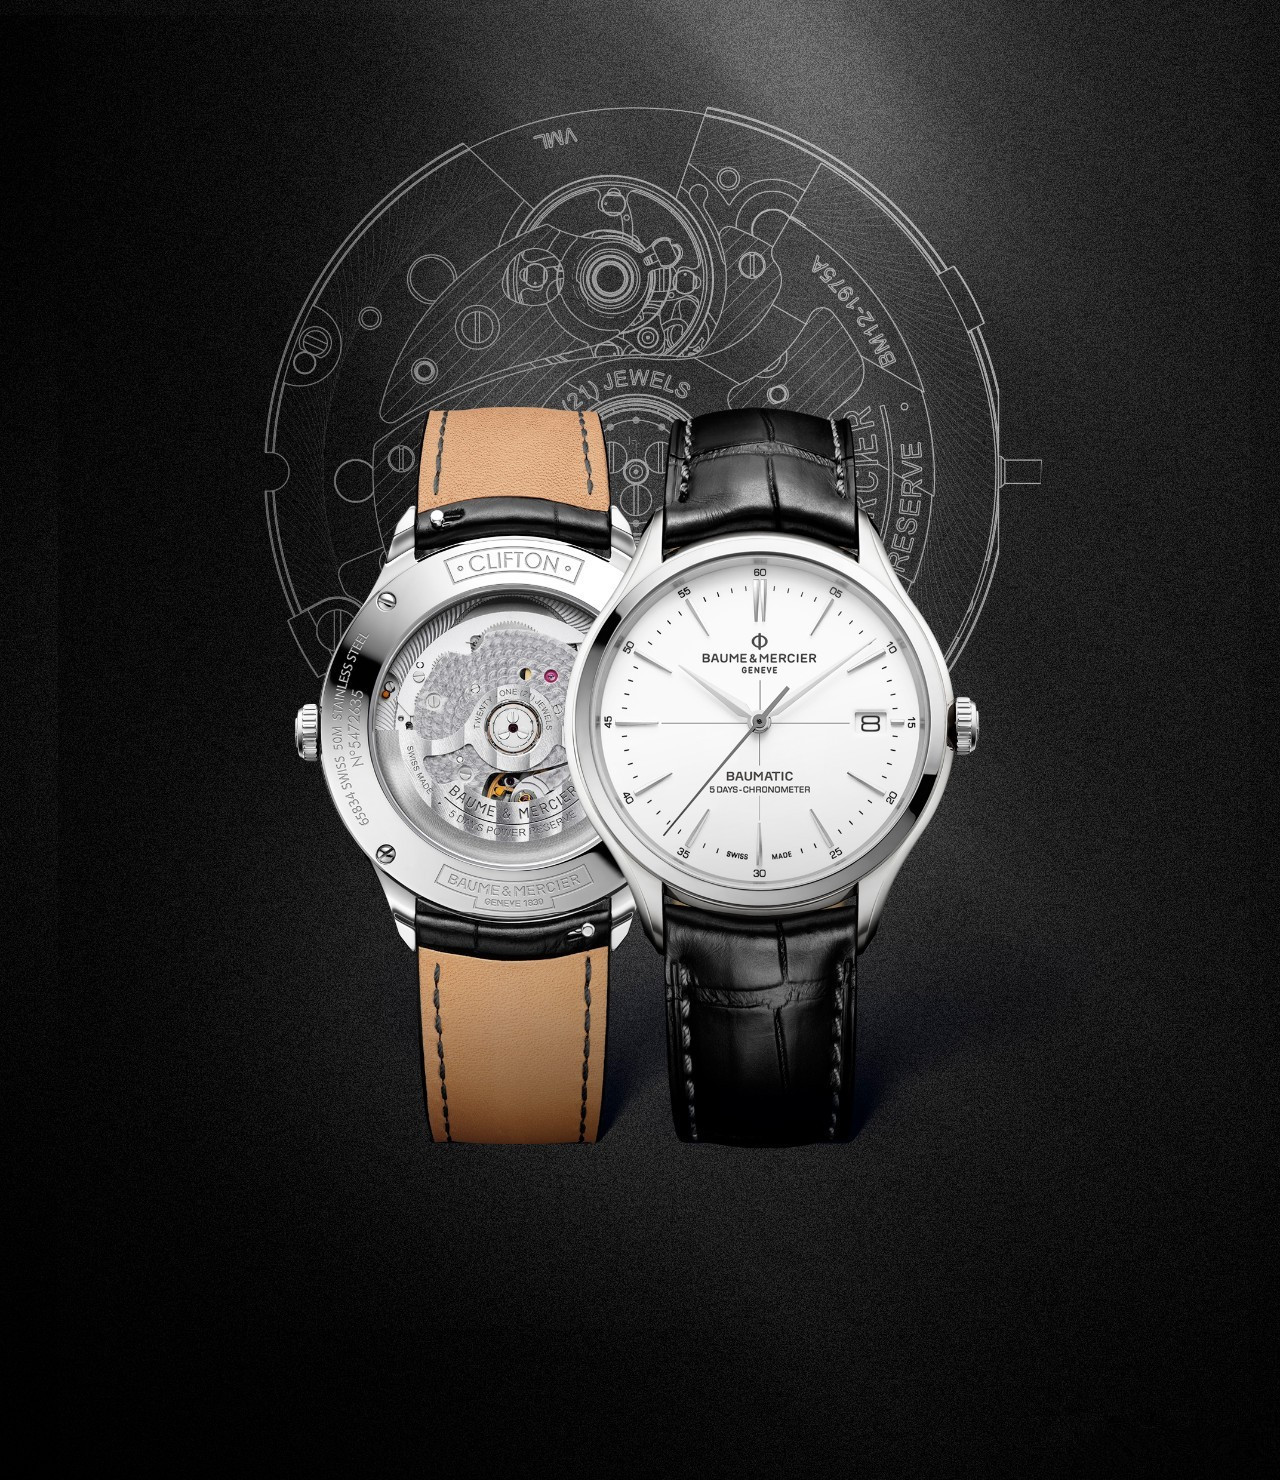 Baume & Mercier Clifton fake watches with white dials are in exquisite design.